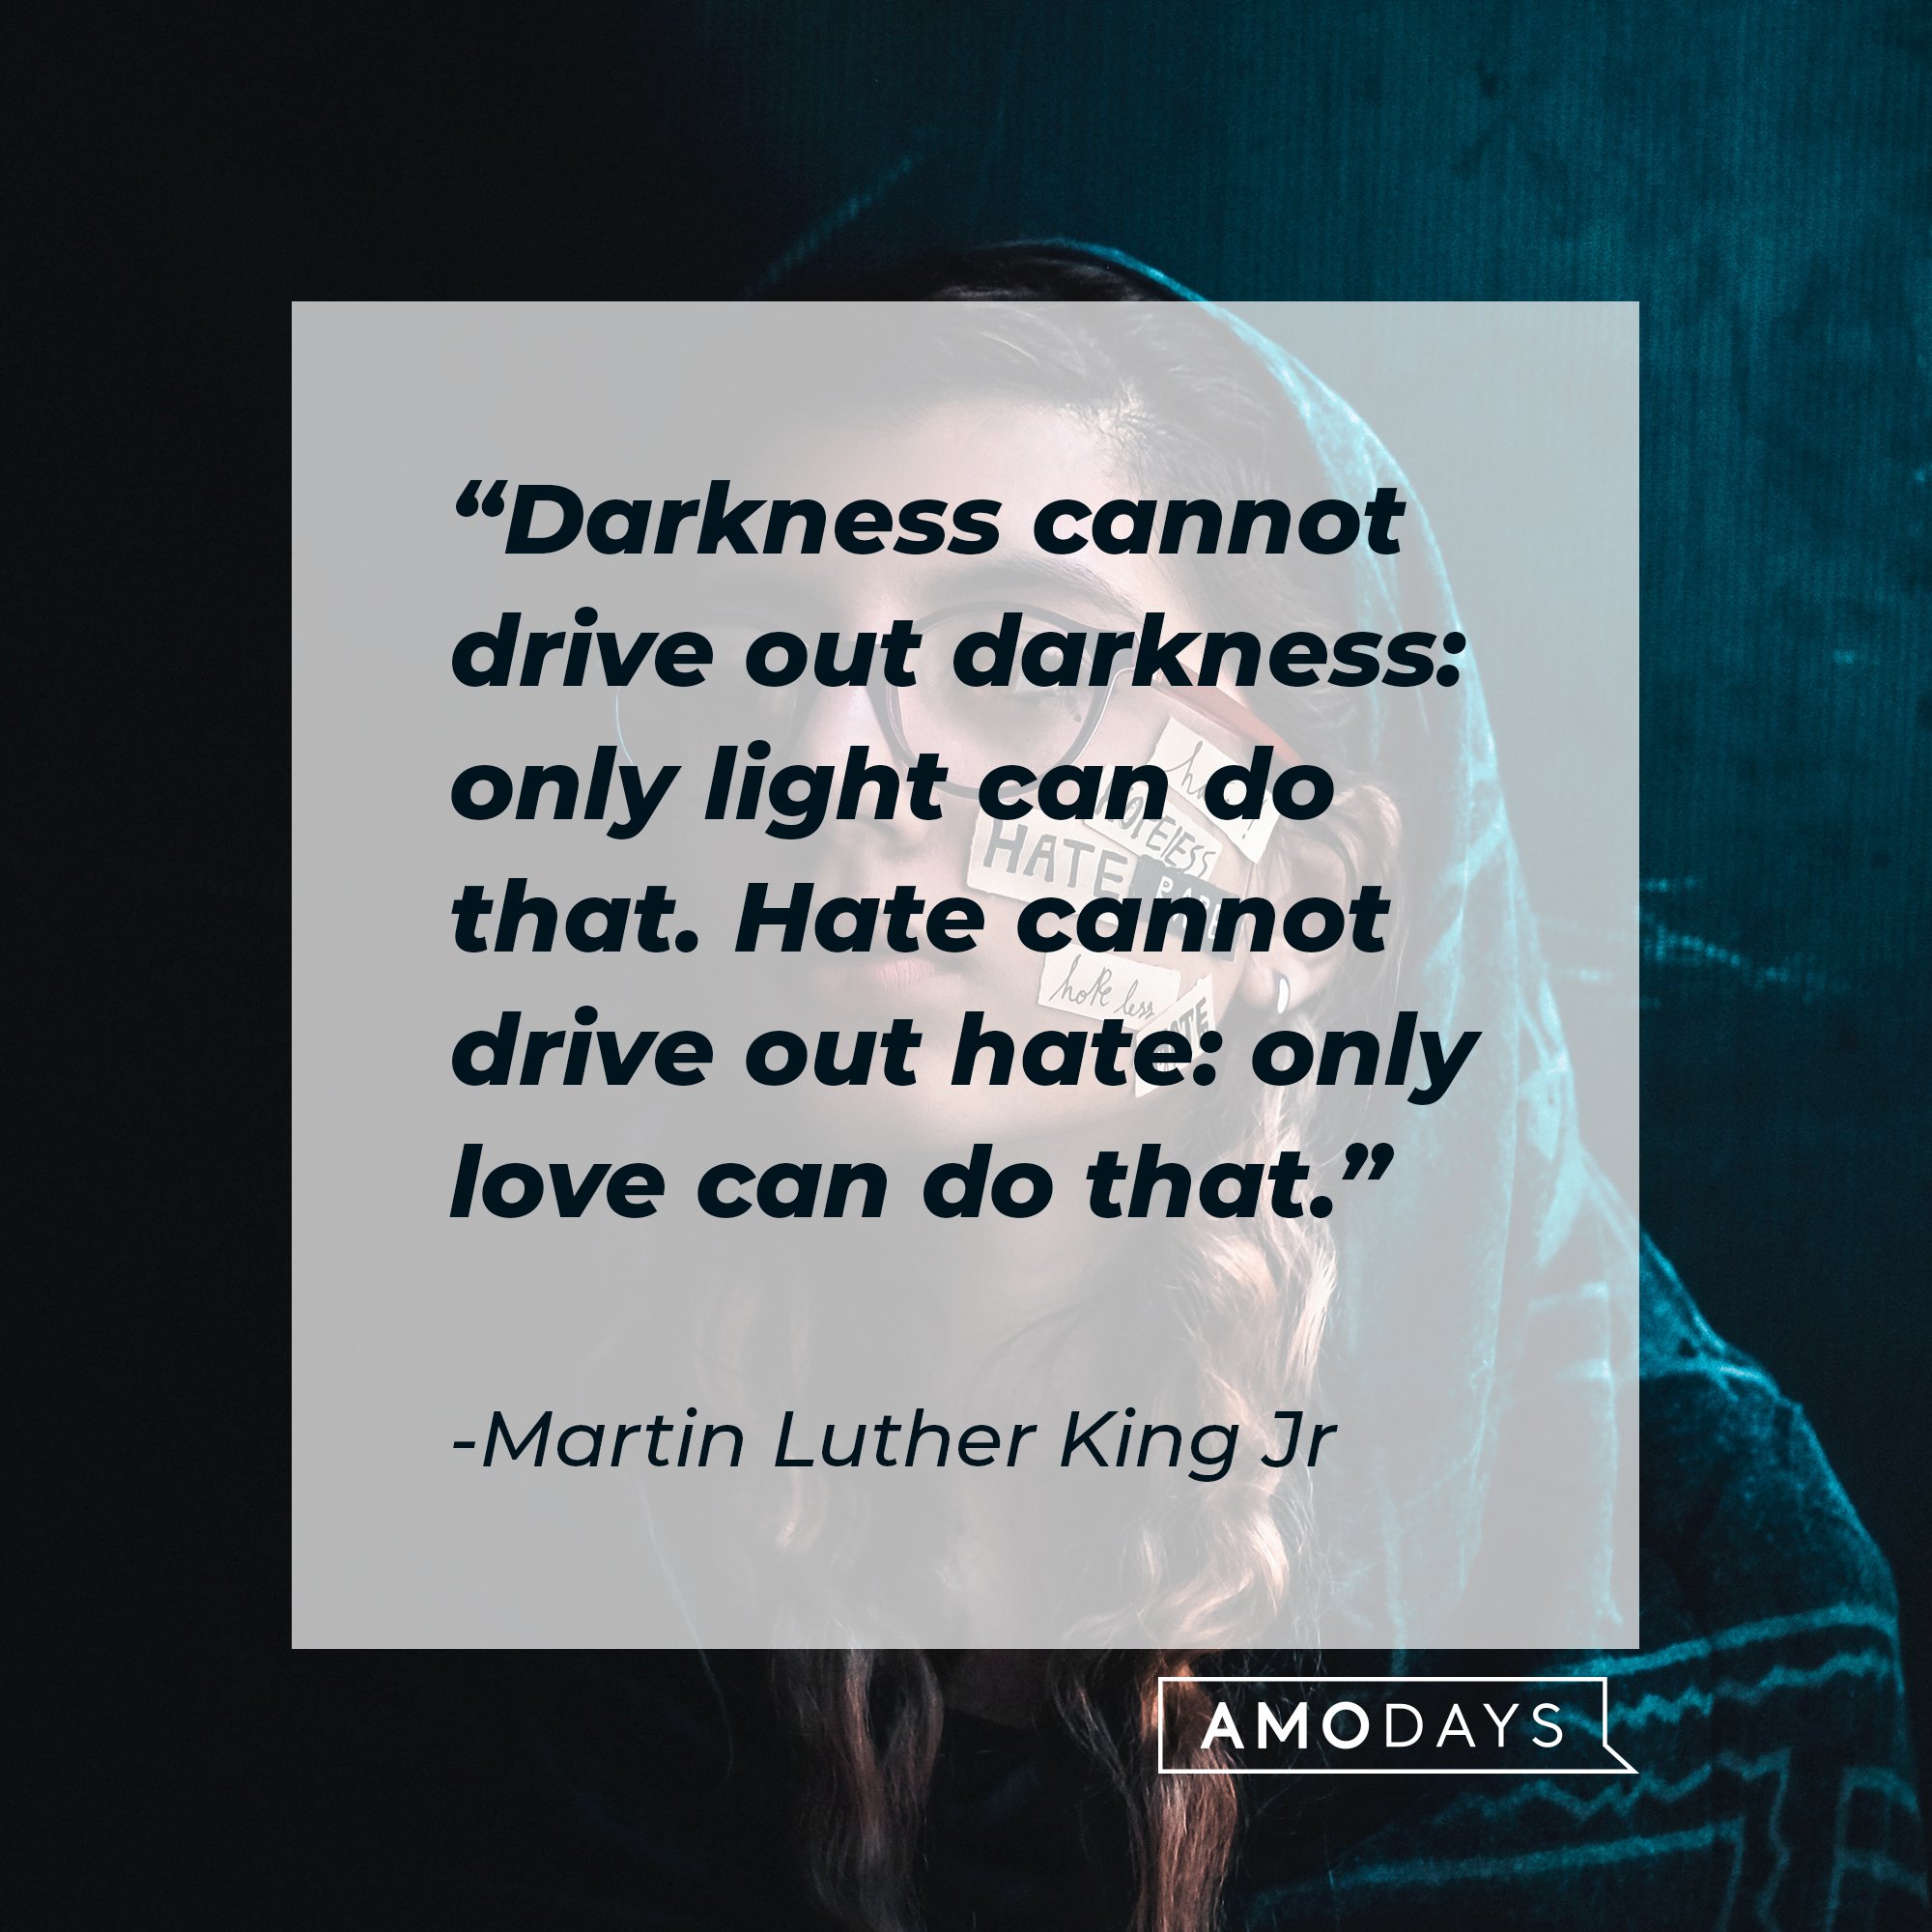 Martin Luther King Jr’s quote: "Darkness cannot drive out darkness: only light can do that. Hate cannot drive out hate: only love can do that." | Image: AmoDays 